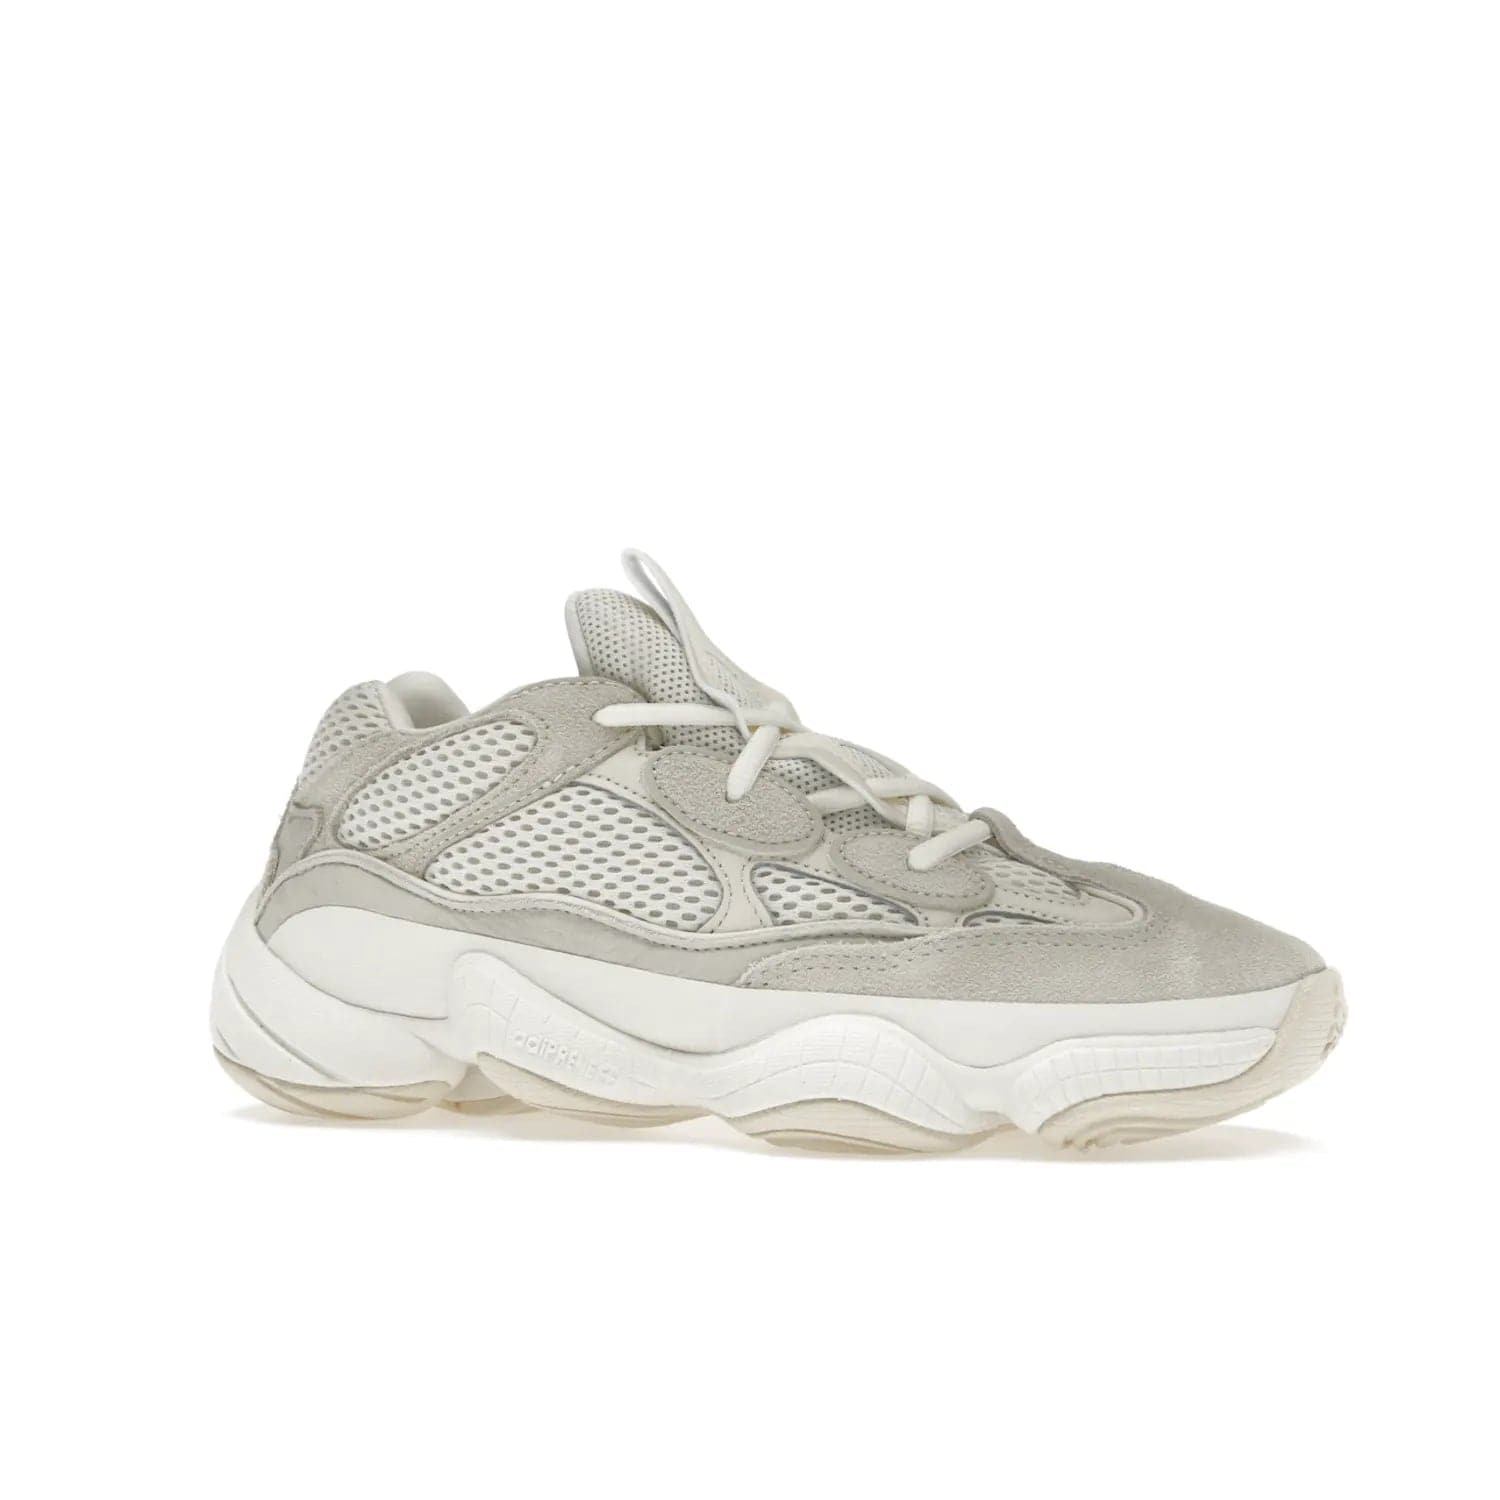 adidas Yeezy 500 Bone White (2023) - Image 3 - Only at www.BallersClubKickz.com - Experience the unique style of the adidas Yeezy 500 Bone White. Featuring a Bone White colorway and white accents, durable construction and comfortably light feel. Get ready to make a statement in 2023.